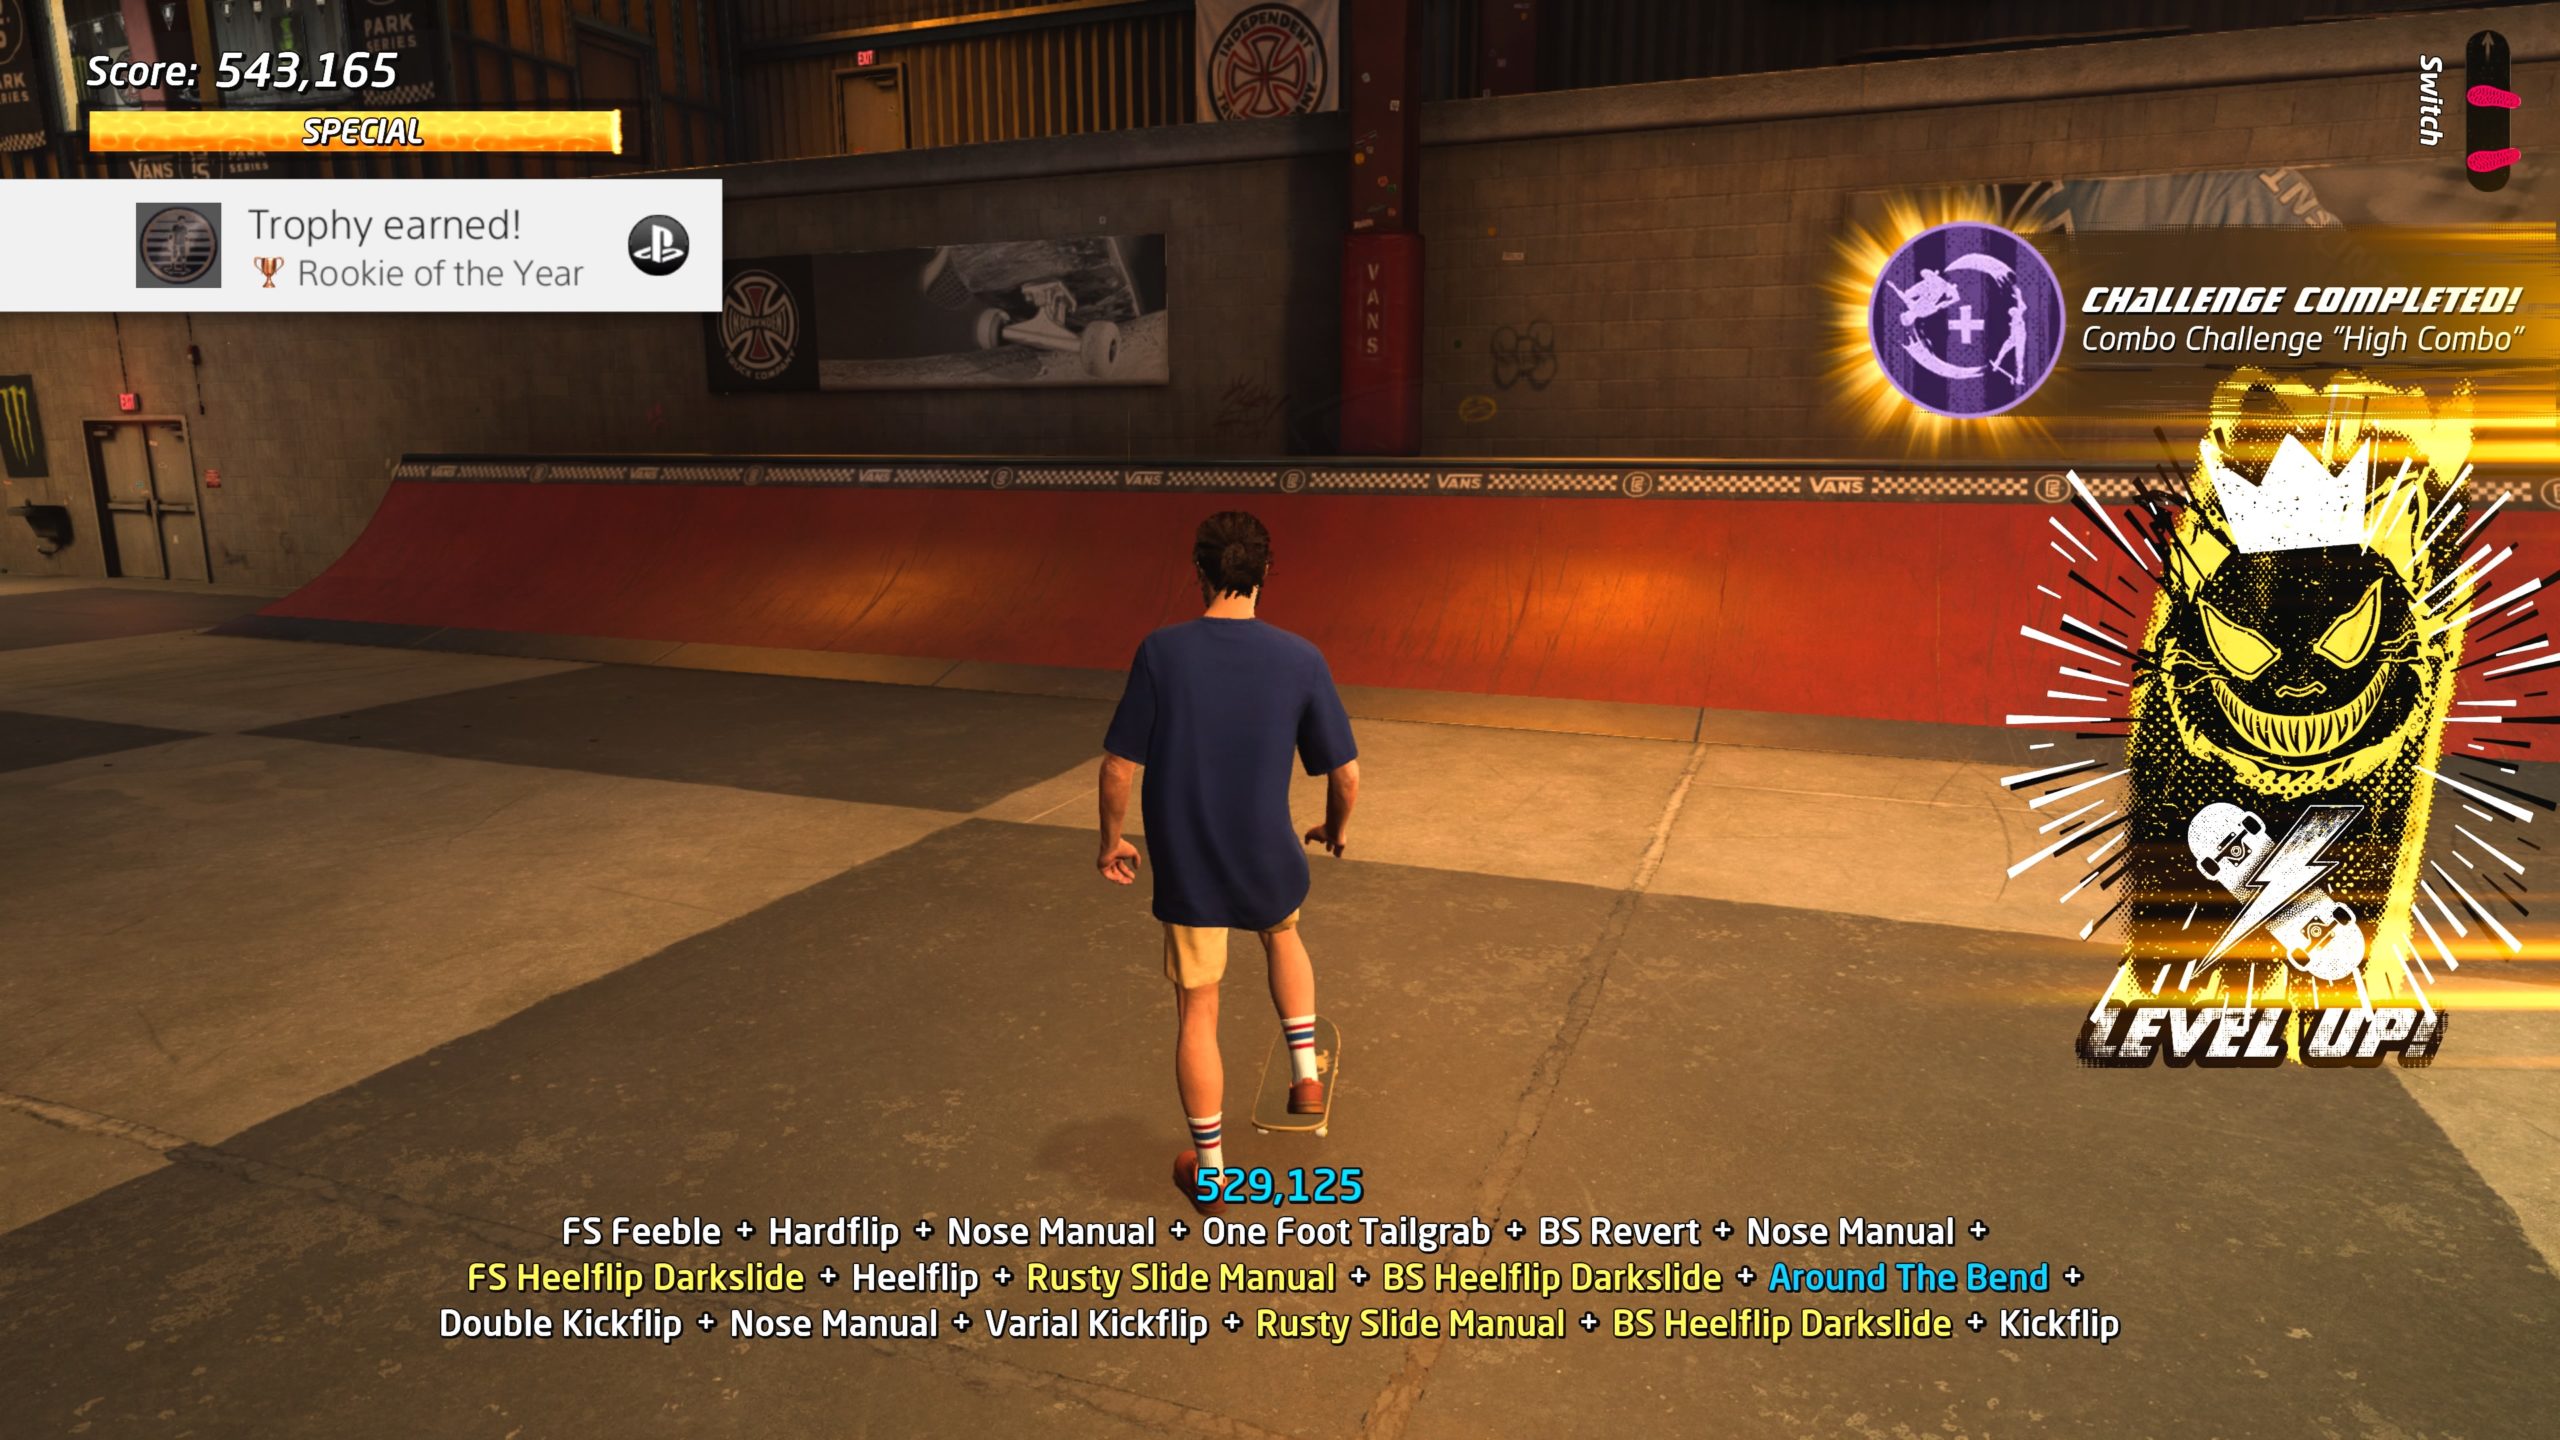 Tony Hawk's Pro Skater 1 + 2 (for PC) Review